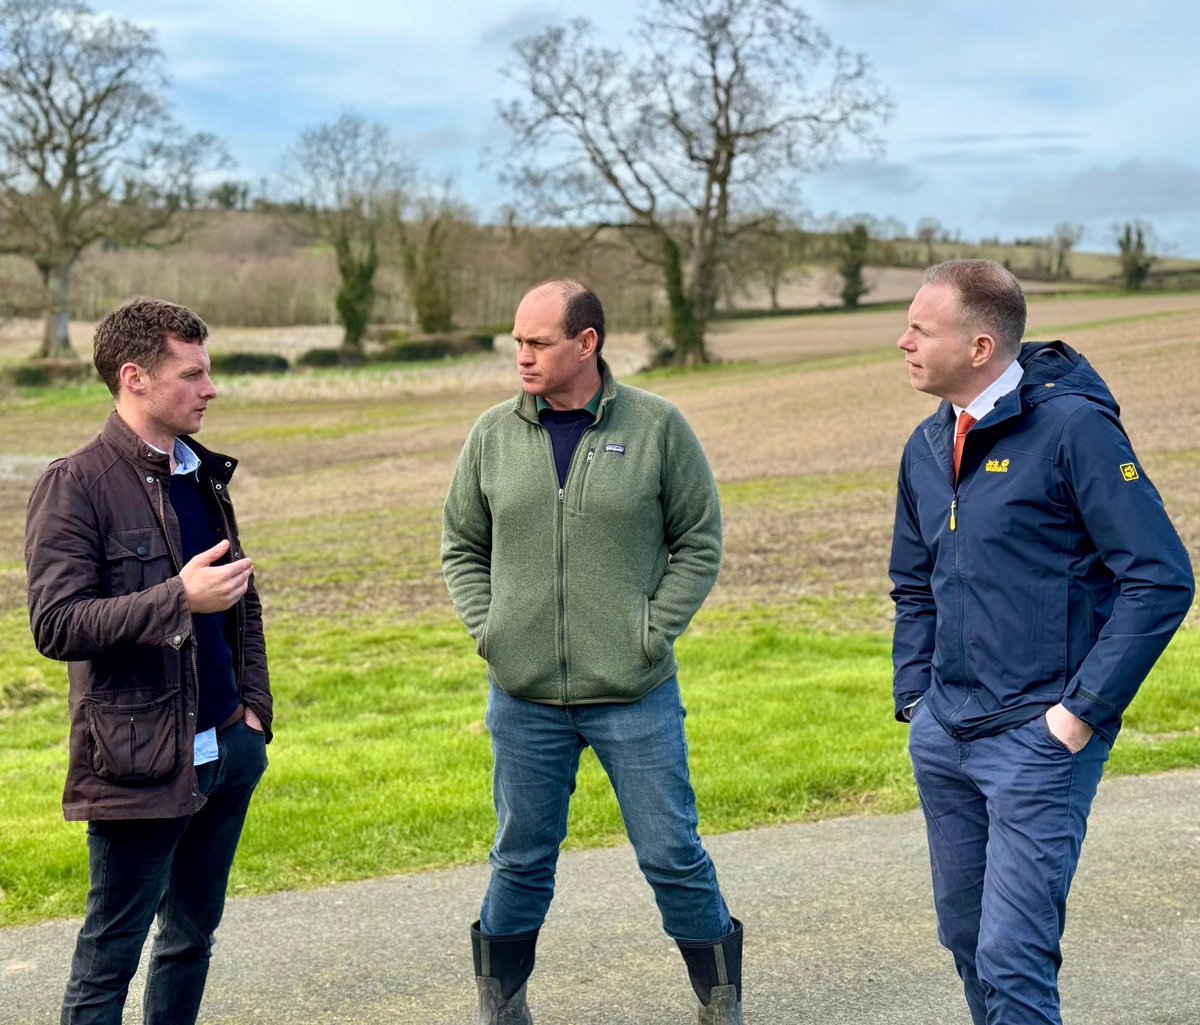 Simon, and the Best family have been leading the way in nature friendly farming for more than 20 years, so it was fantastic to get the chance to visit @ActonHouseFarm in Poyntzpass with @RSPBNI today to see best practice 👨🏼‍🌾 🌾